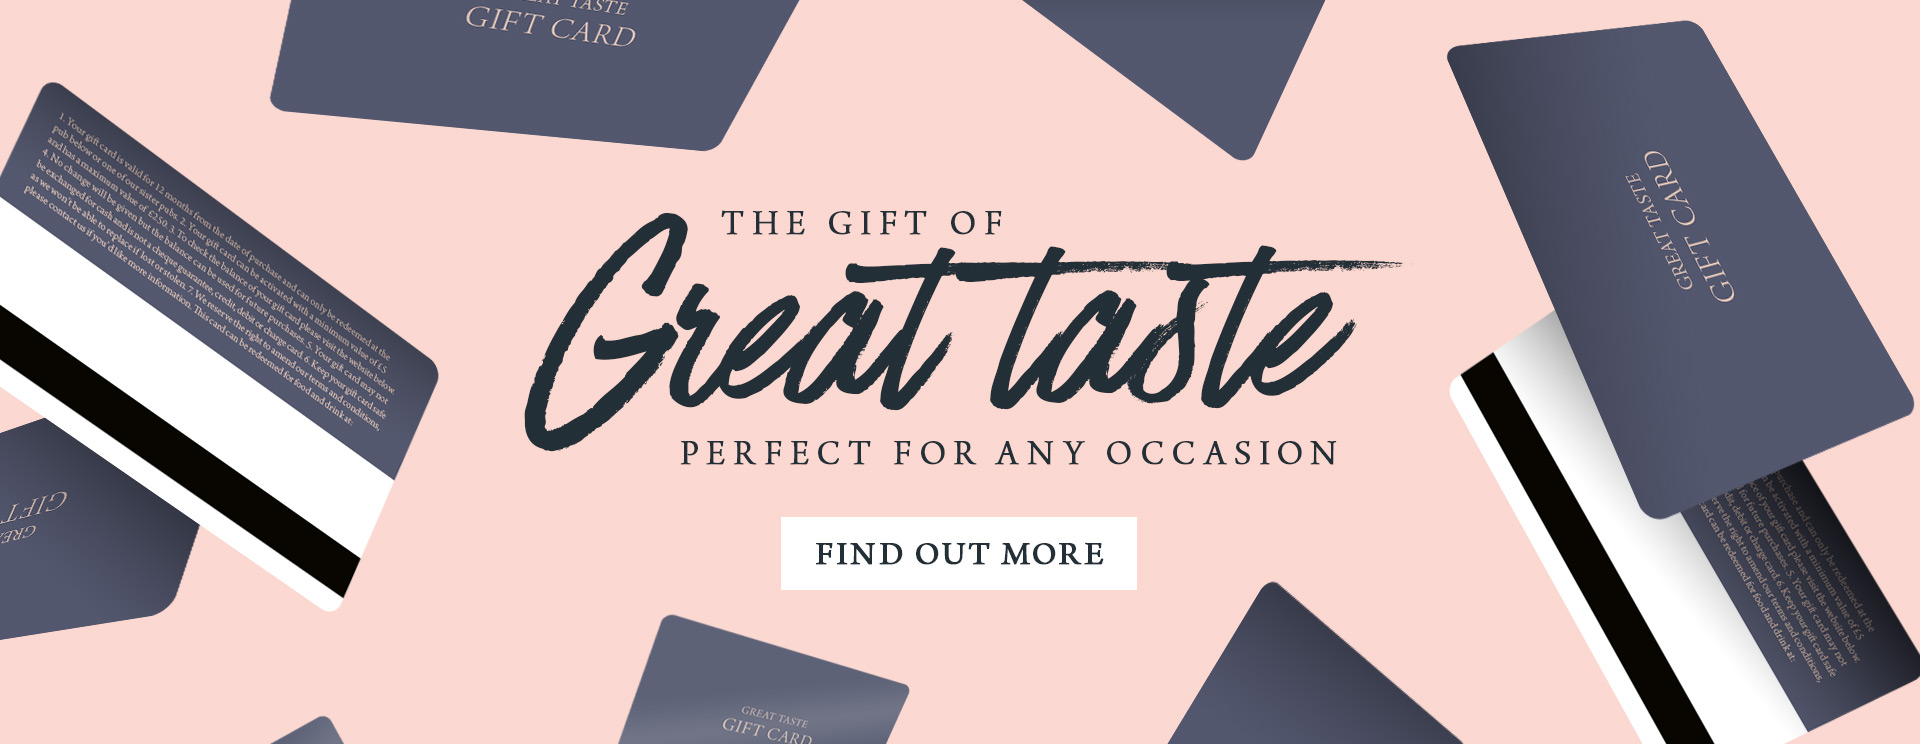 Give the gift of a gift card at The Oatlands Chaser